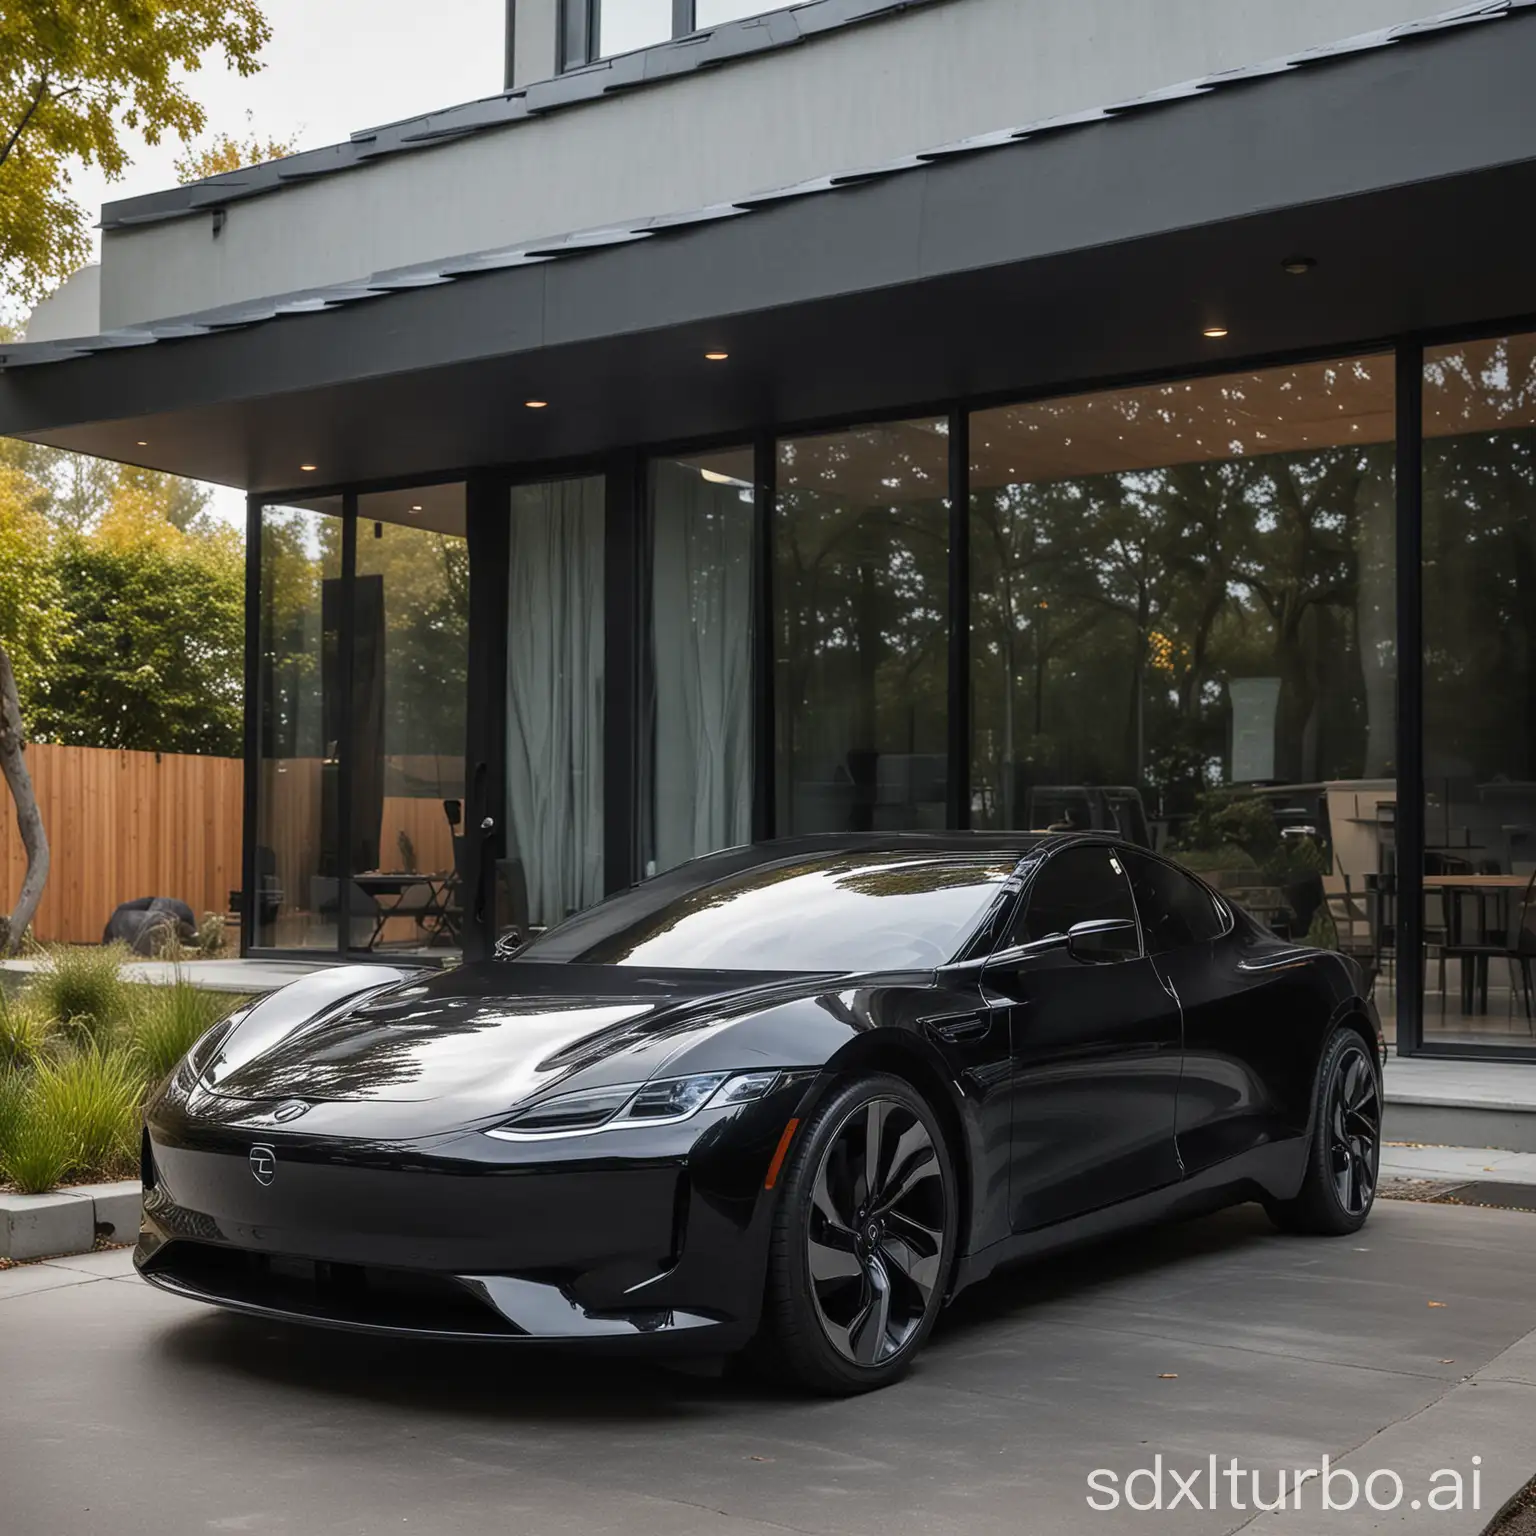 A sleek, black electric car is parked in front of a modern home. The car is made of a shiny, metallic material and has a sleek, aerodynamic design. The car's windows are tinted and the license plate is obscured.